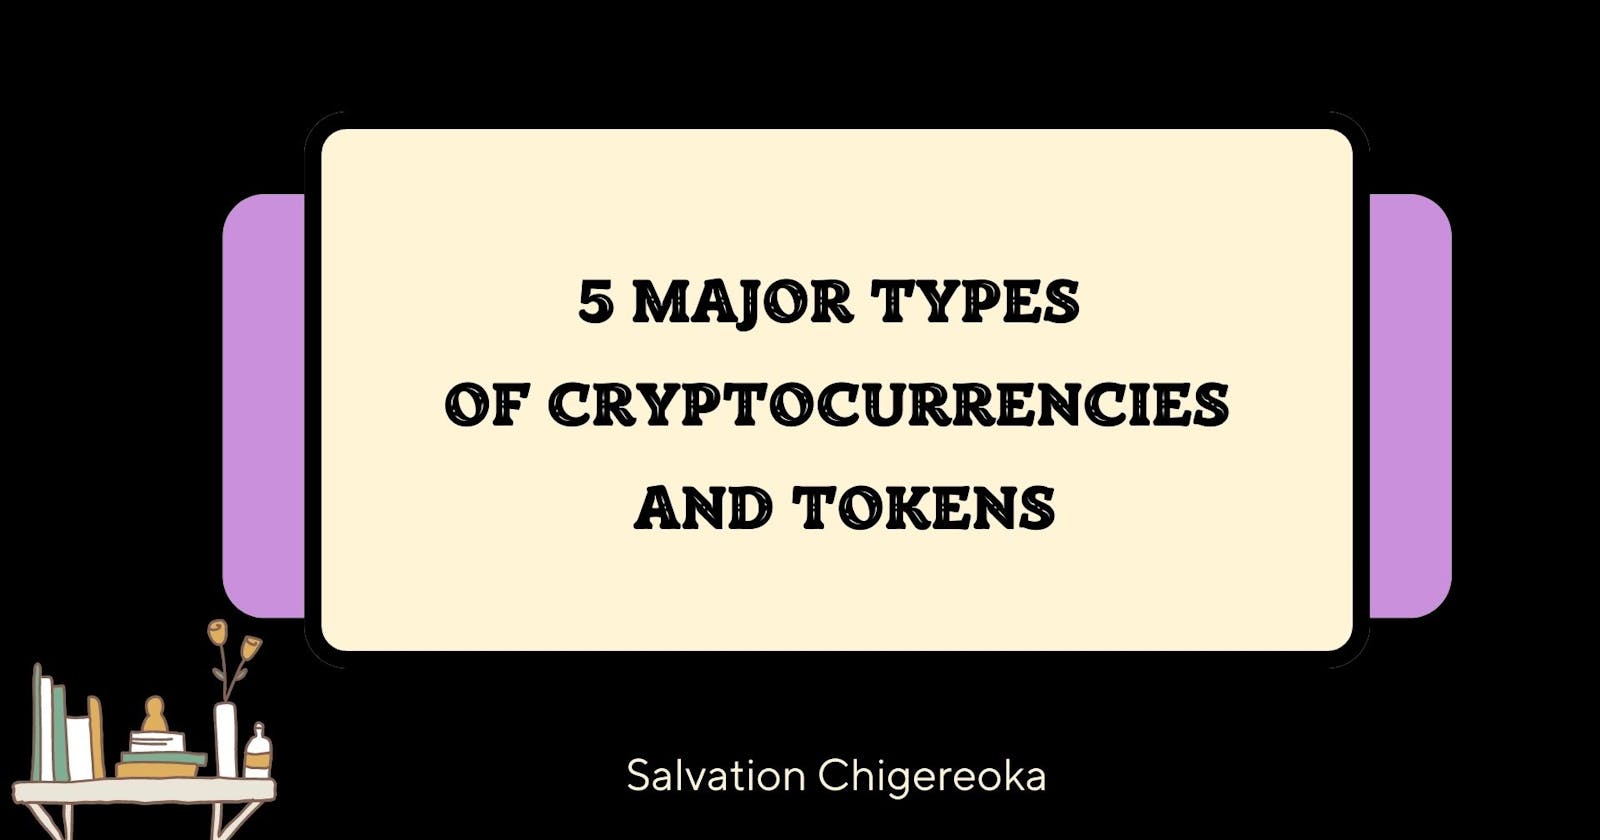 5 Major Types of Cryptocurrencies and Tokens